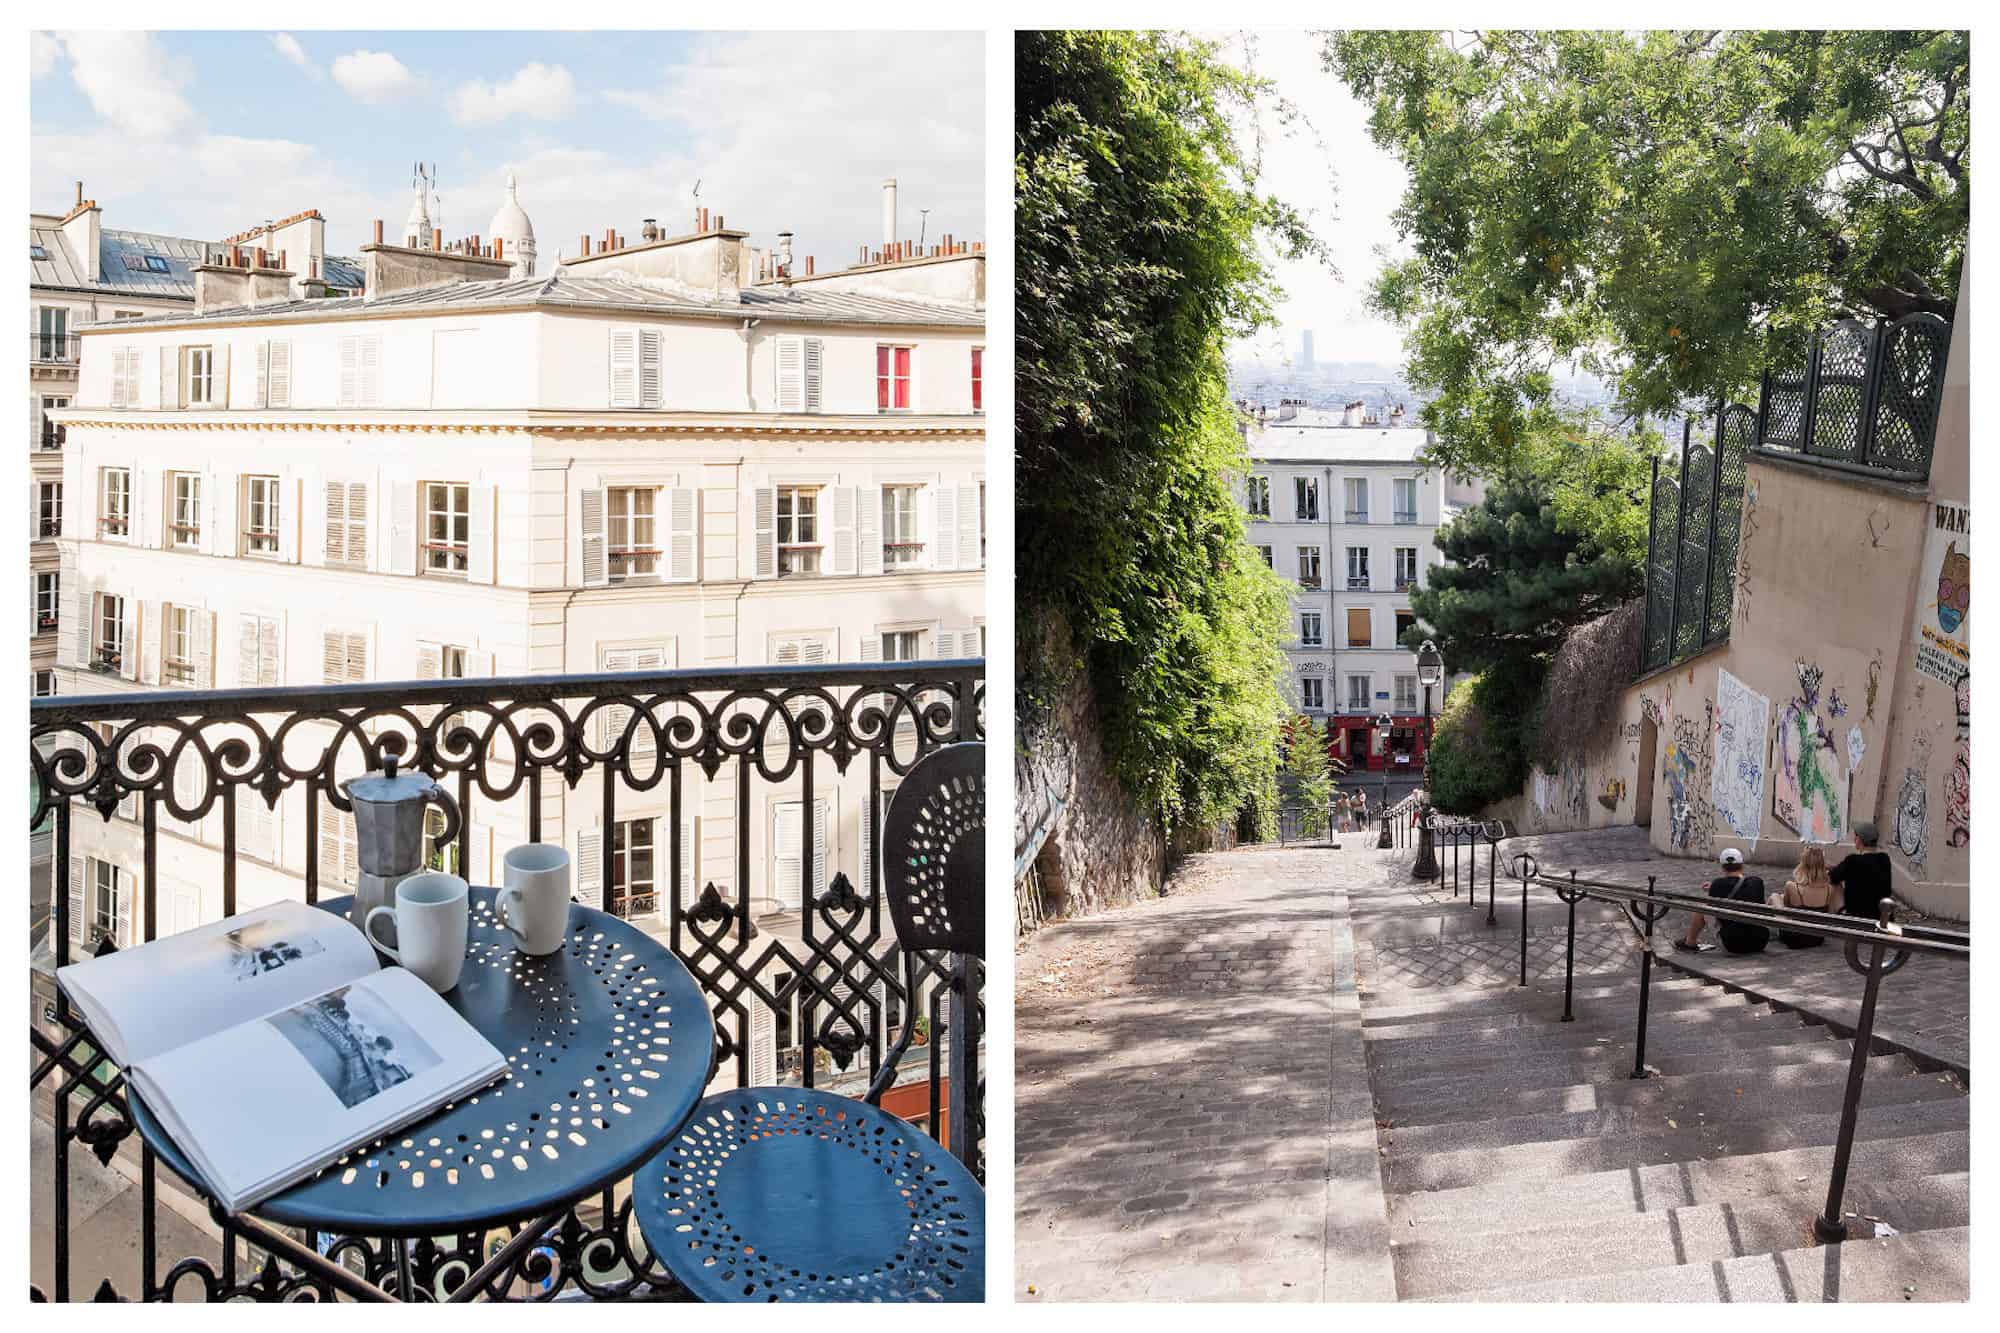 A table, two cups and a coffee pot on a table set up on the balcony of Parisian apartment, with a view of the sunny street (left). The narrow stone stairs leading up to Montmartre hill in Paris, lined by leafy trees (right).